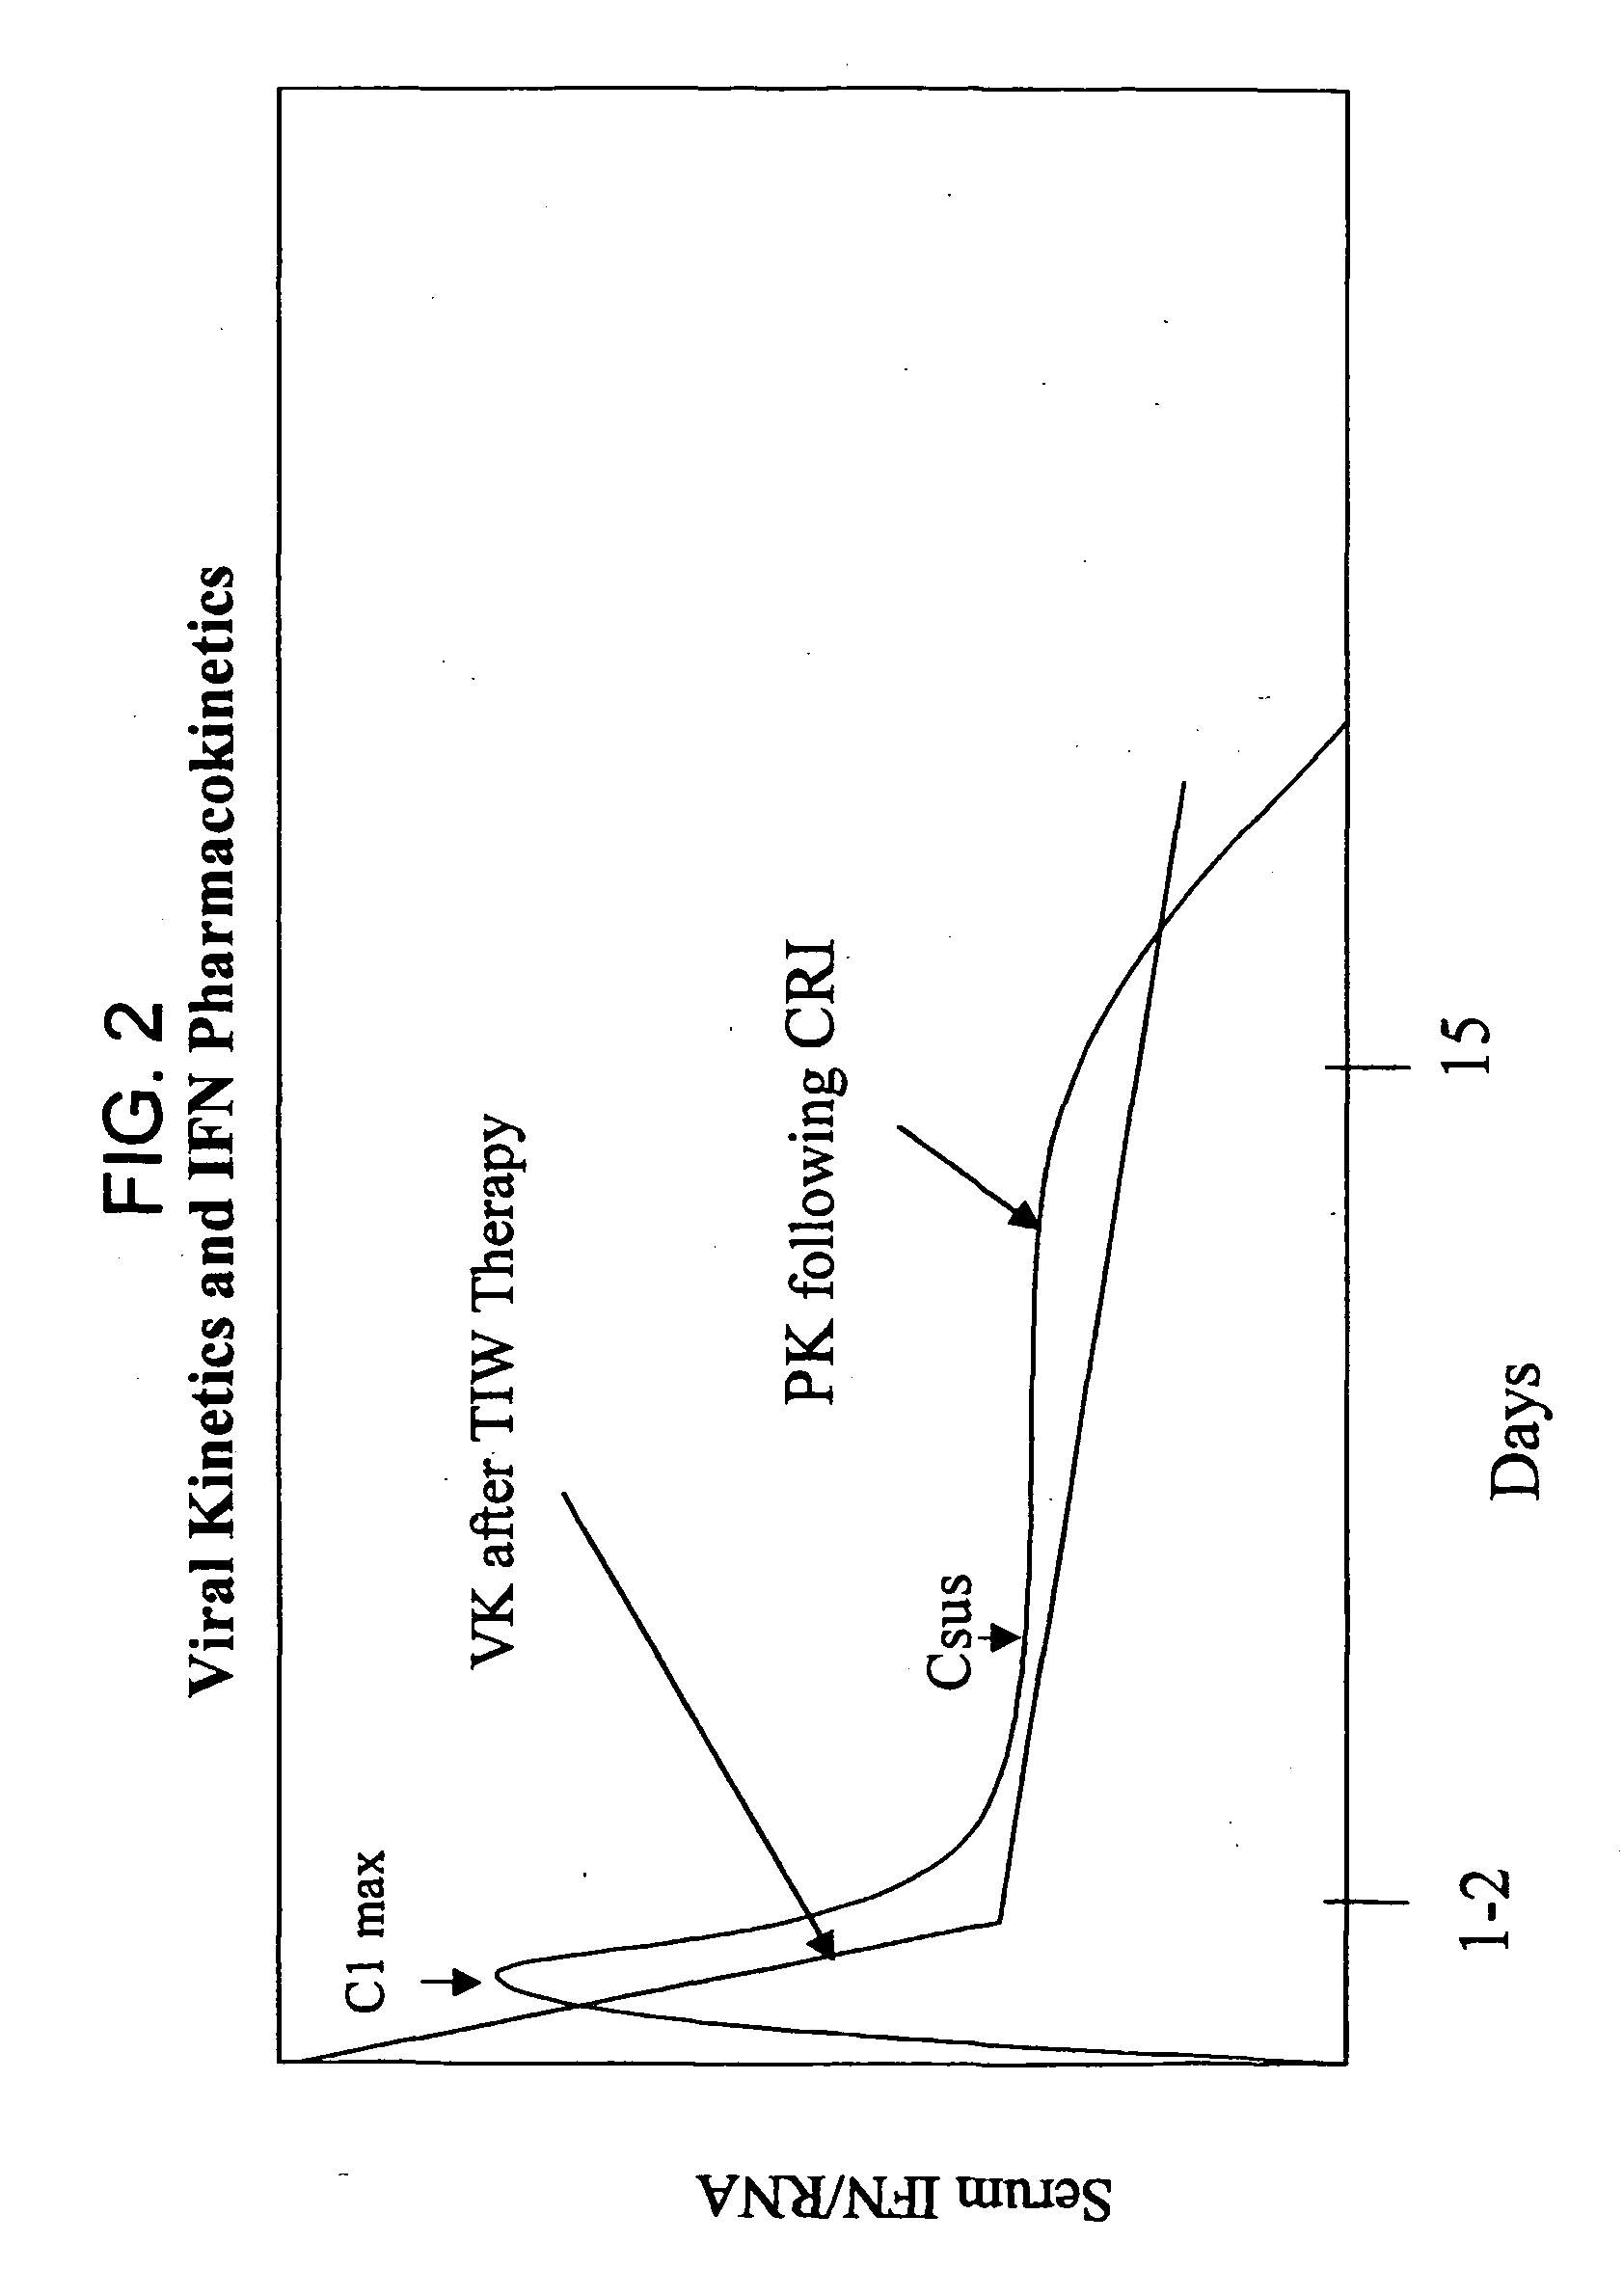 Method of treating hepatitis virus infection with a multiphasic interferon delivery profile